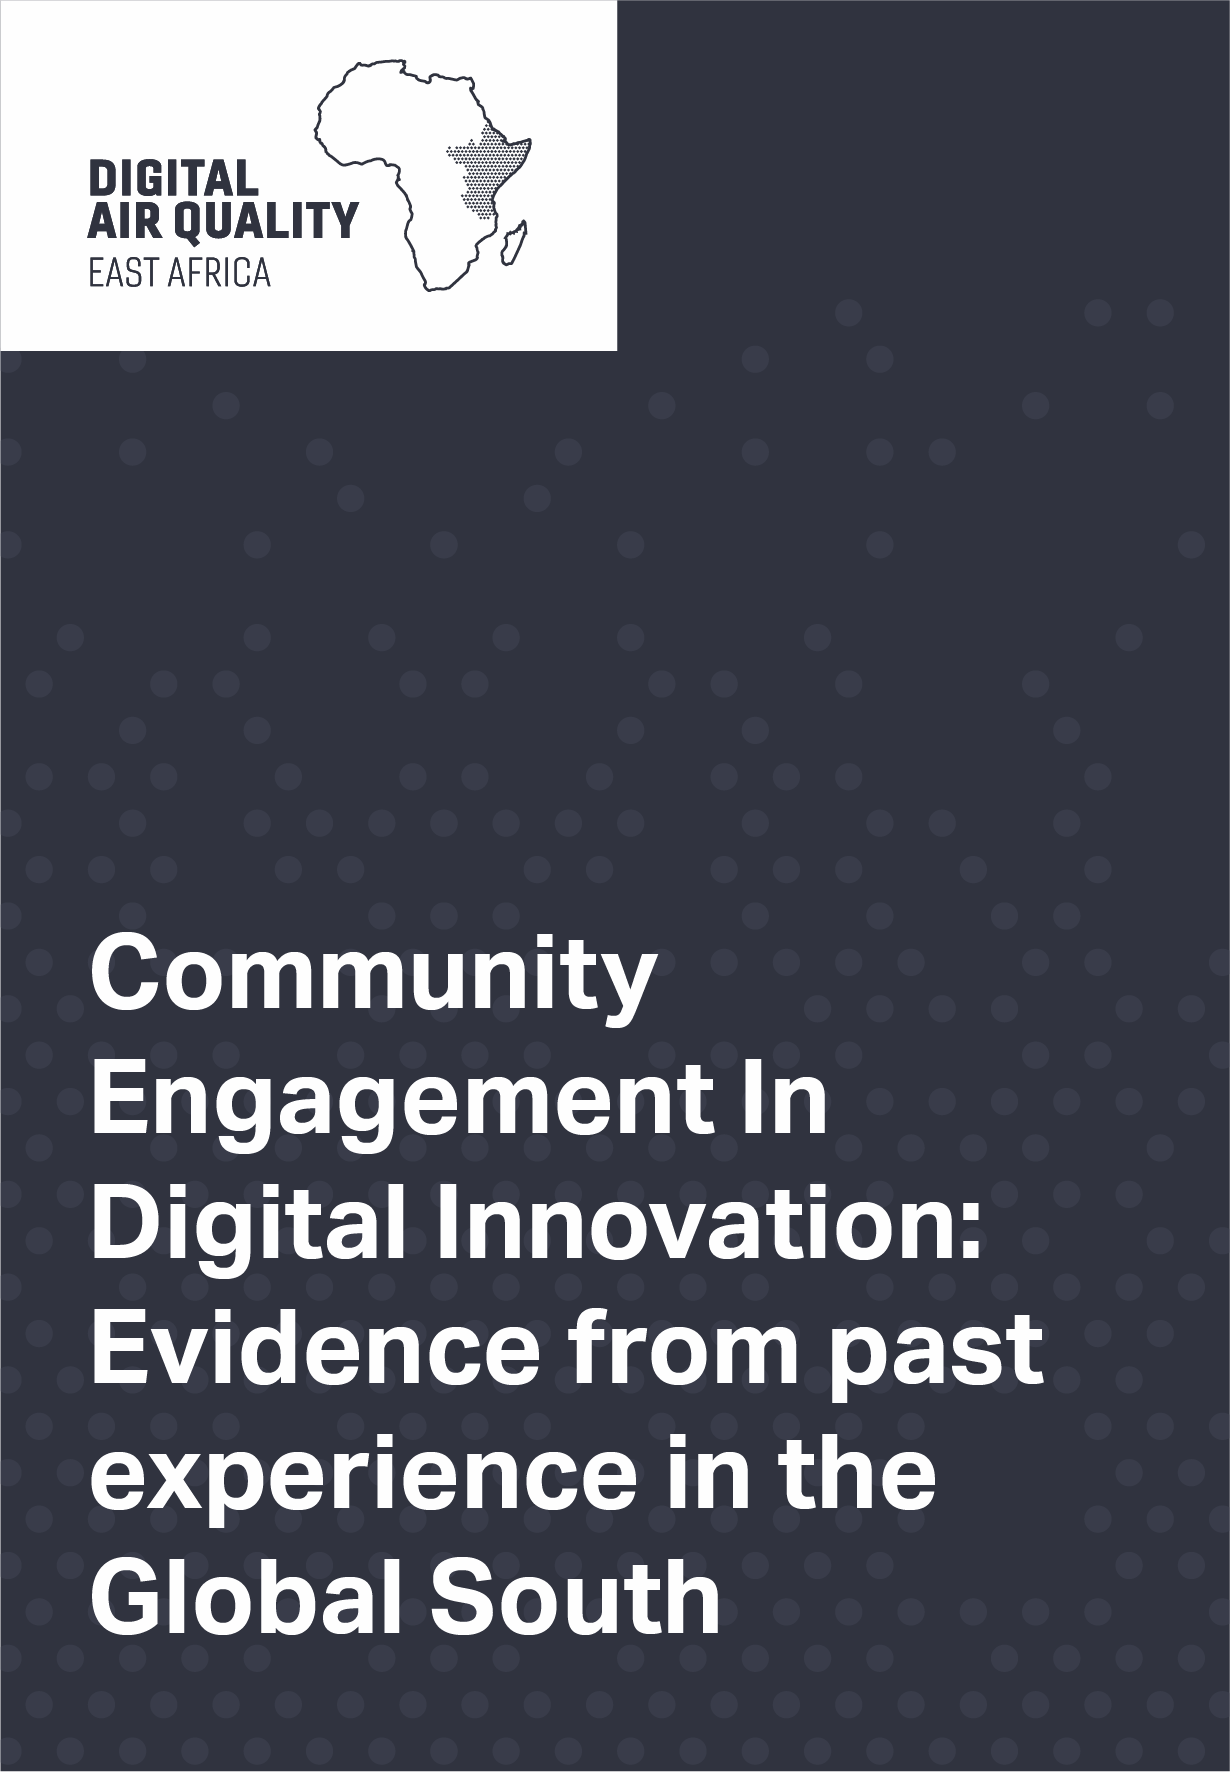 Community Engagement In Digital Innovation Evidence from past experience in the Global South .png